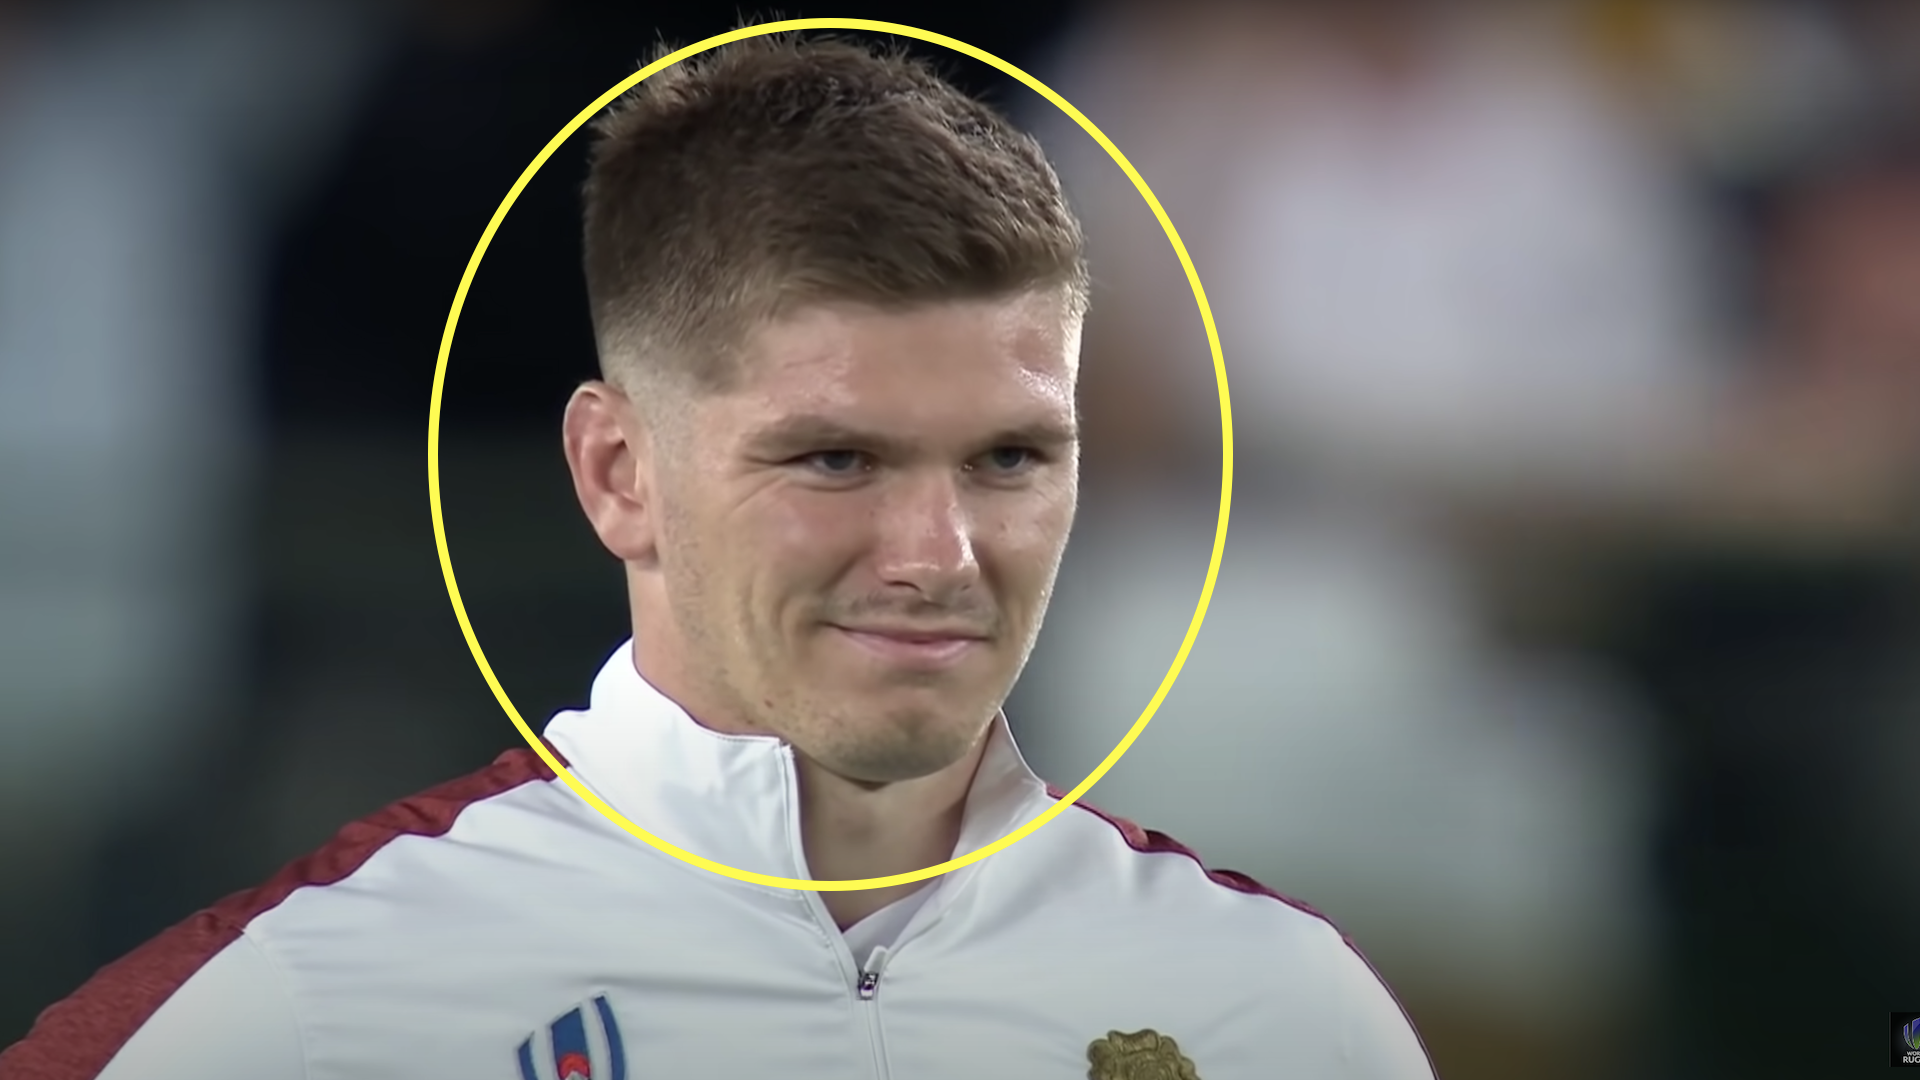 Owen Farrell explains story behind infamous smirk against haka in 2019 World Cup